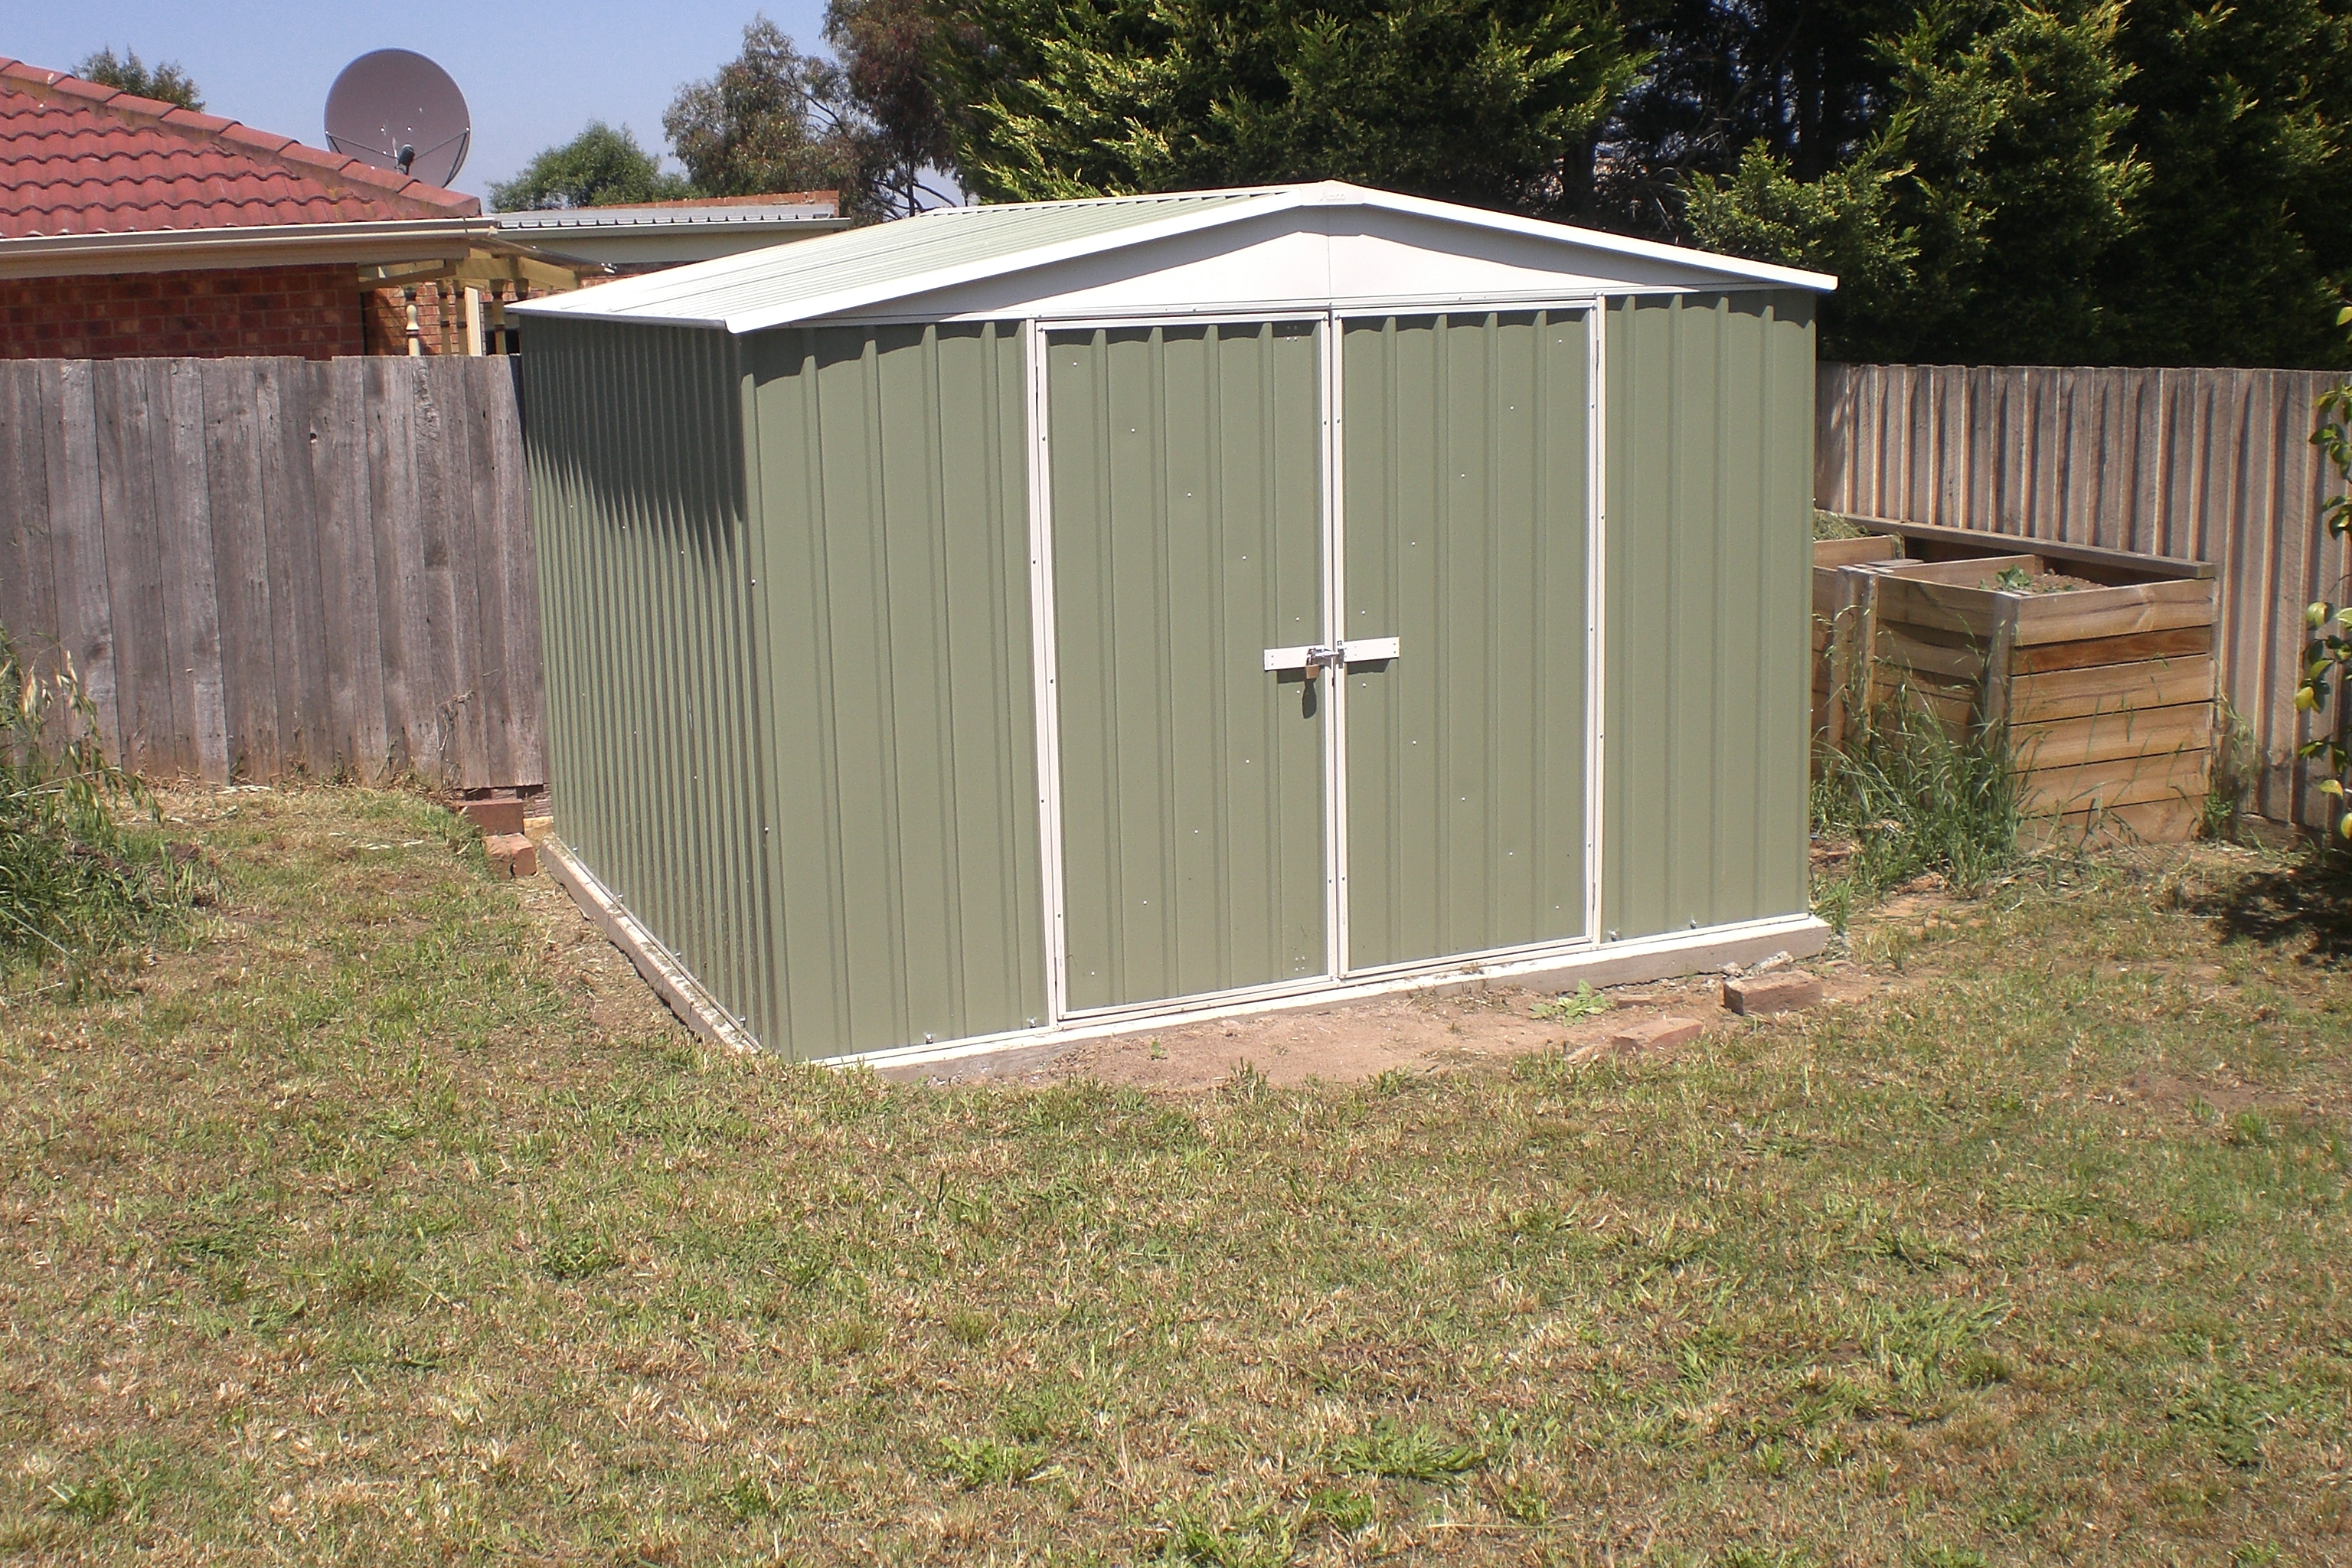 garden sheds south africa cape town | )@% LeTs Do ShEd PrOjEcT ^^@